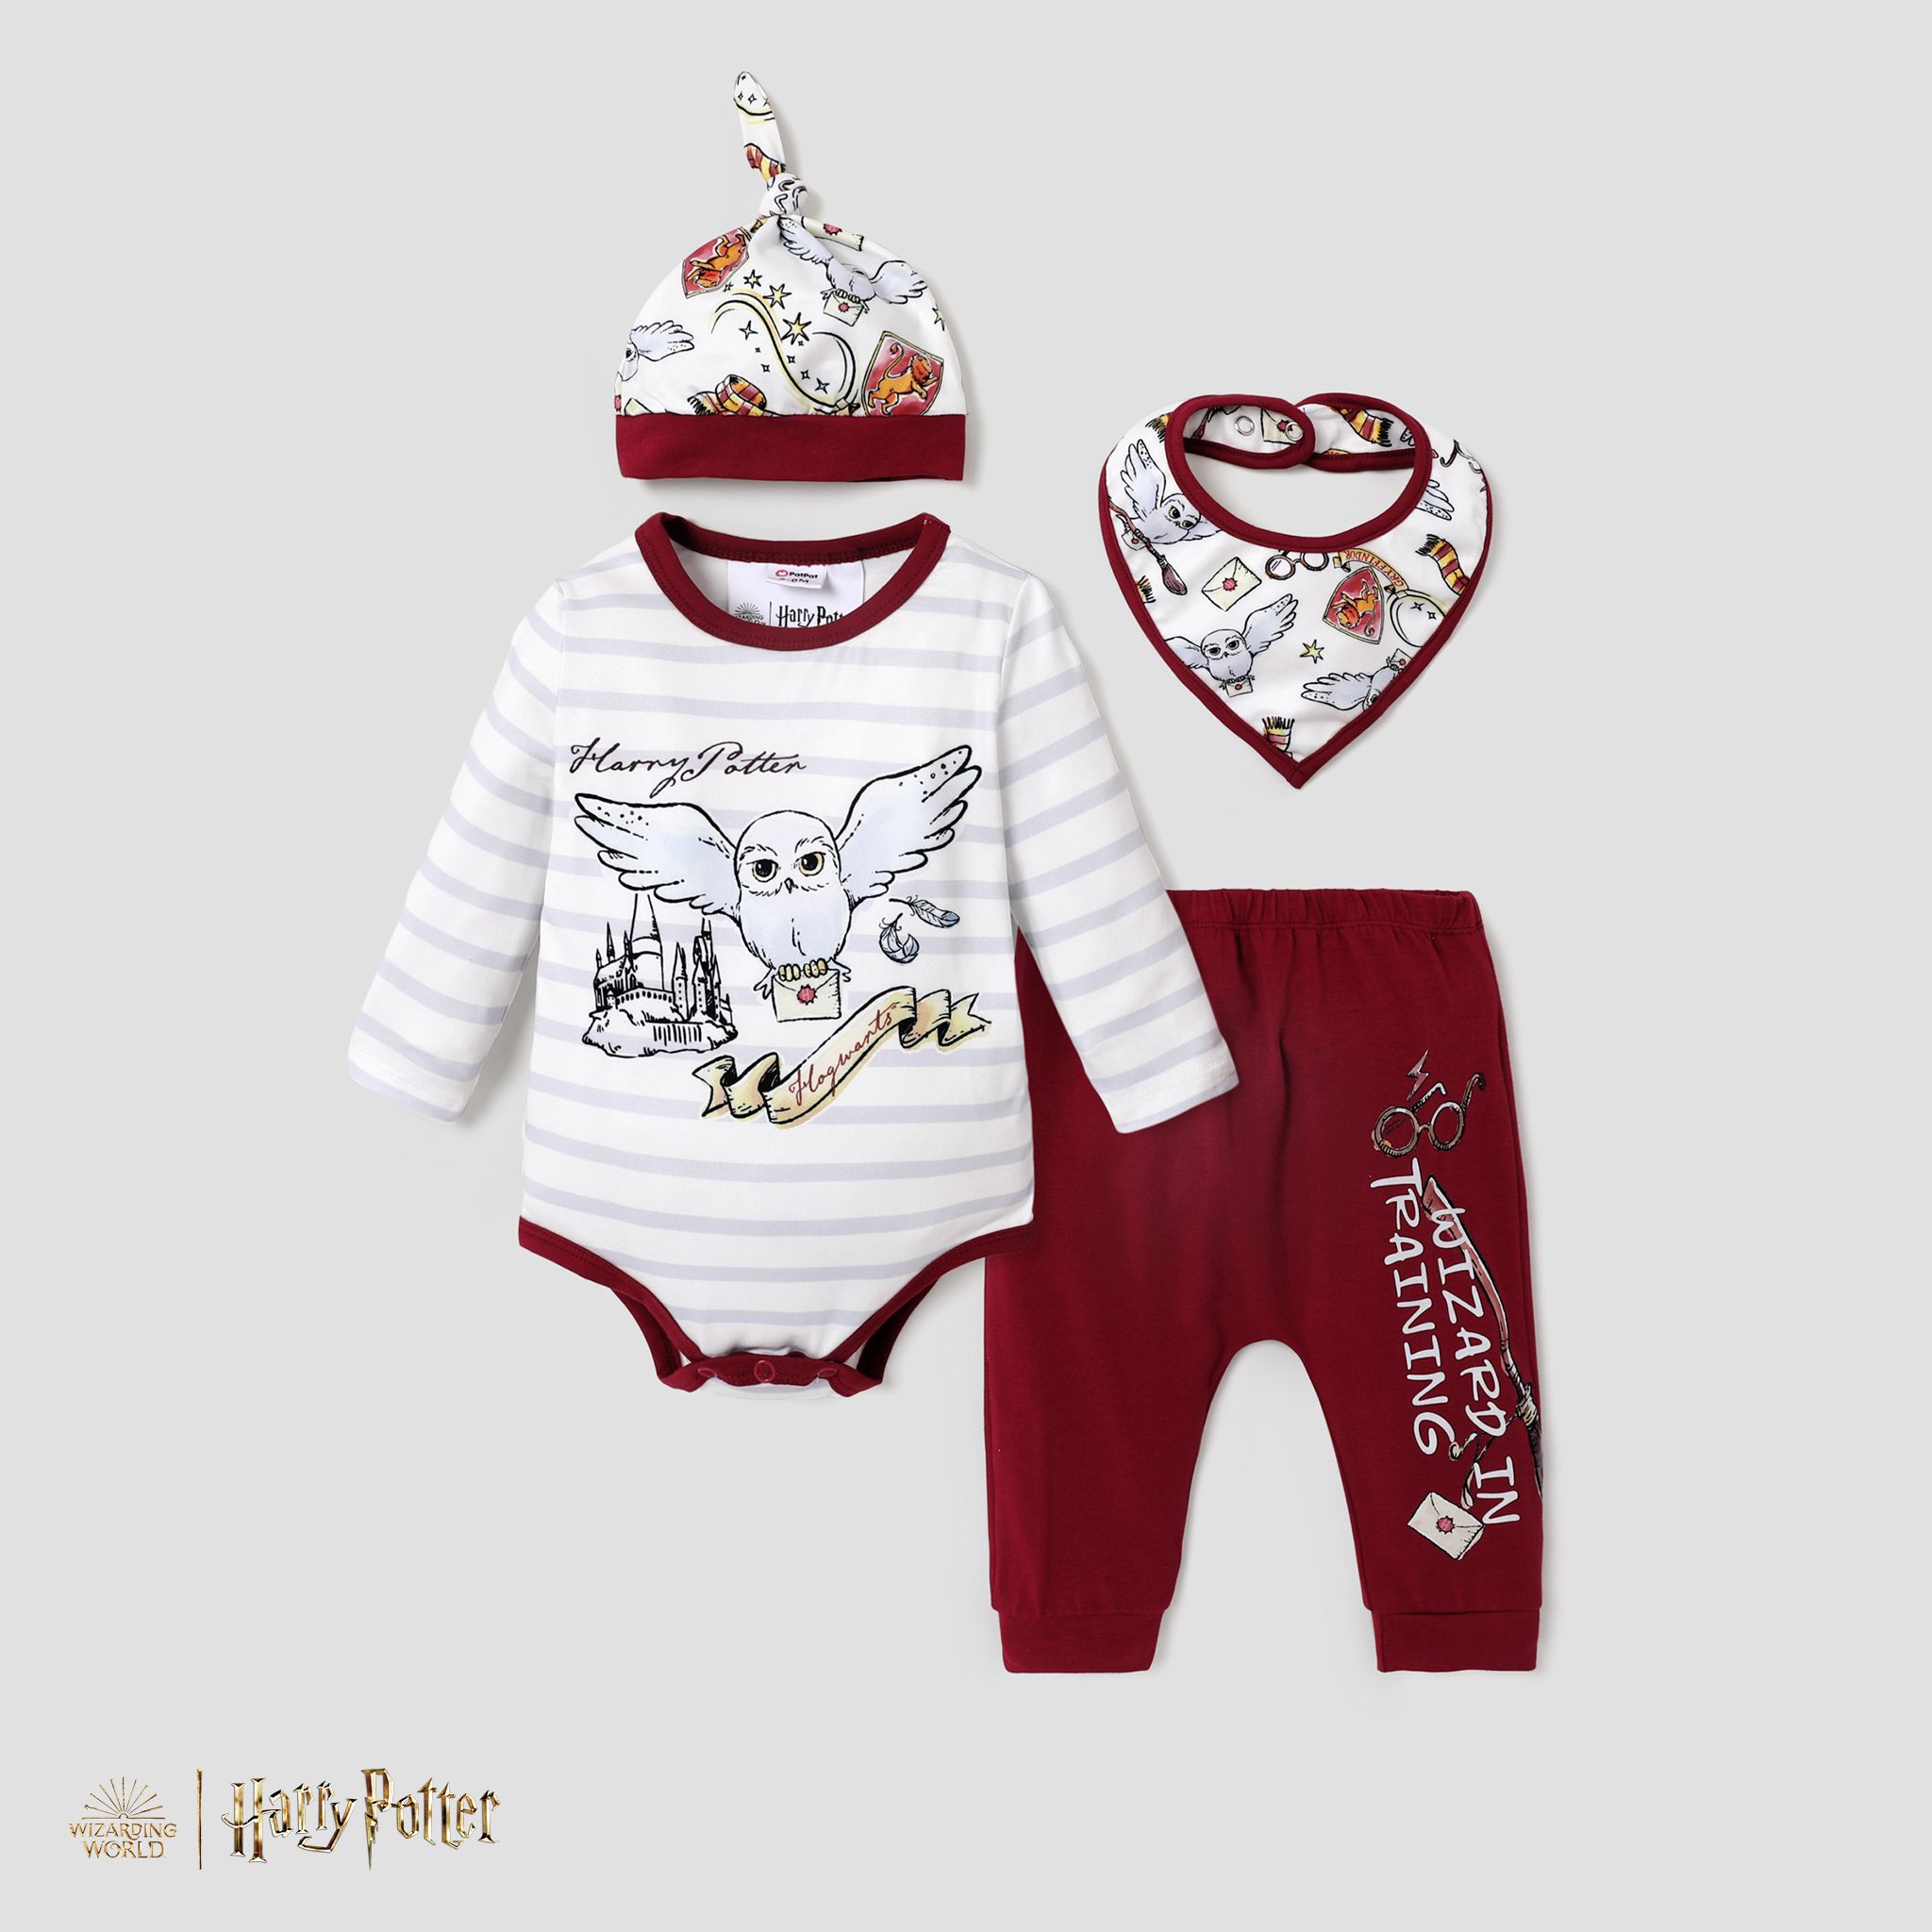 Harry Potter Baby Boy Big Eagle Graphic Long Sleeve Triangle Jumpsuit With Pants, Hat And Mouthband Set